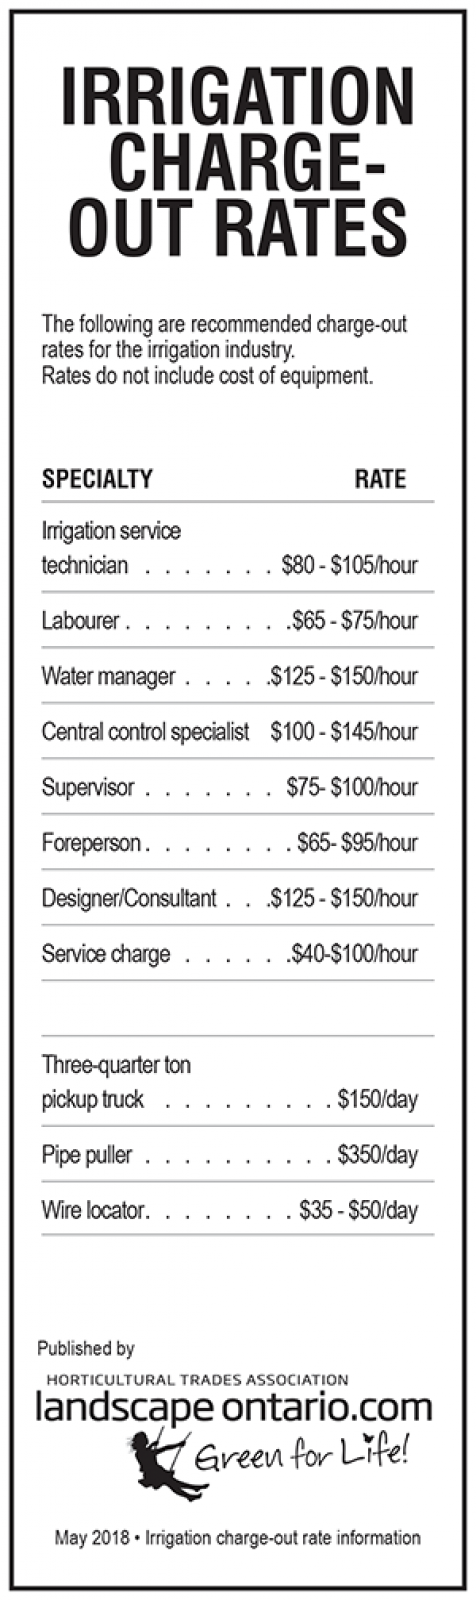 Irrigation charge-out rate card 2018